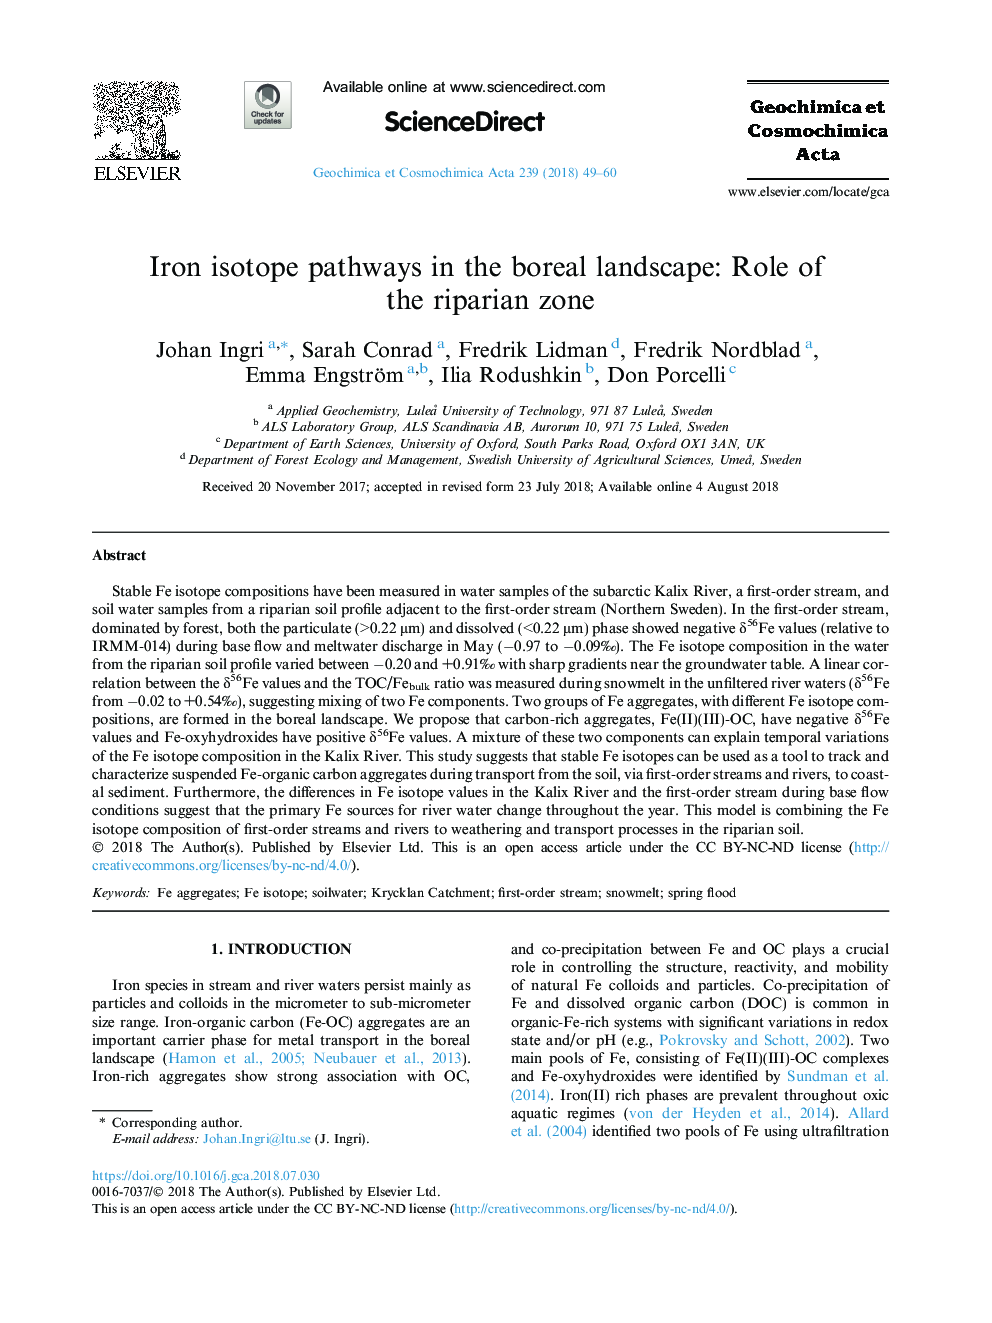 Iron isotope pathways in the boreal landscape: Role of the riparian zone